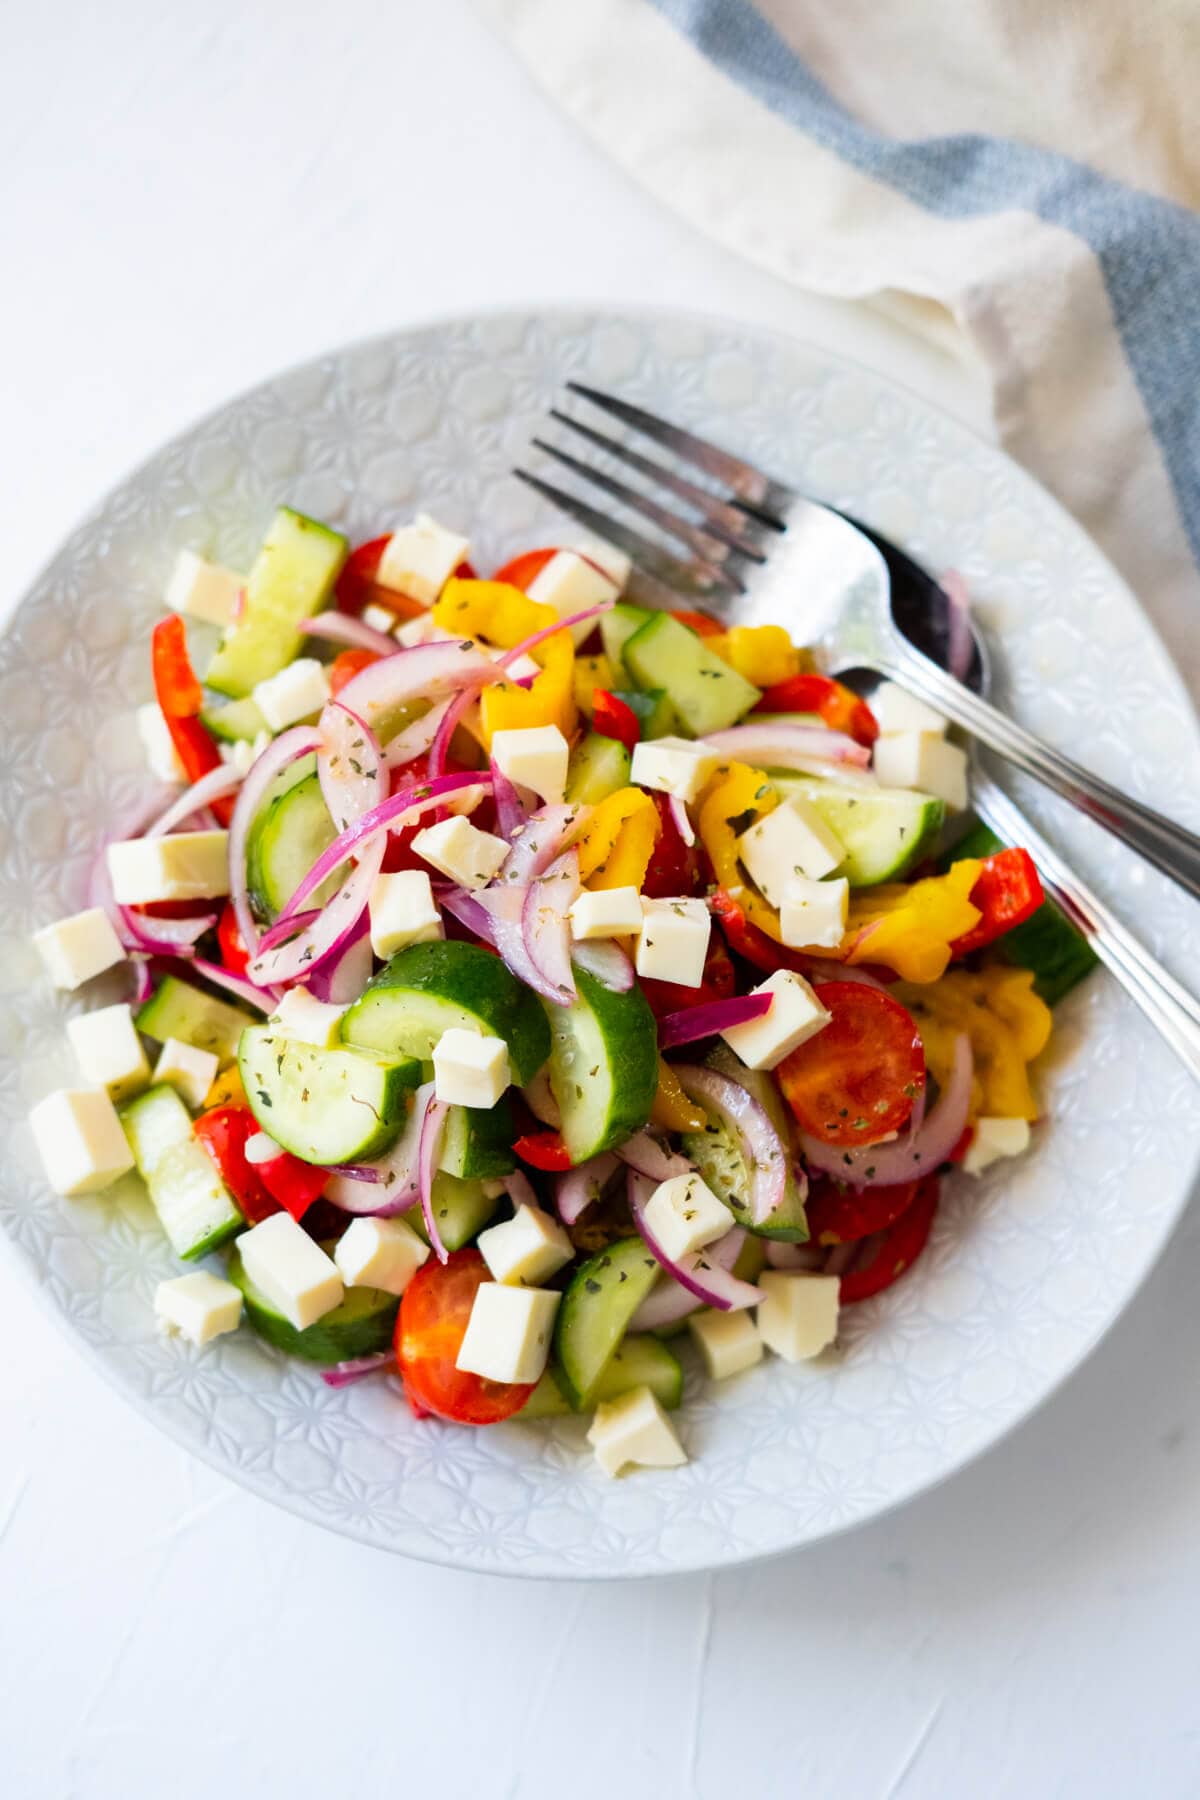 Refreshing Greek salad made with cucumber, bell peppers, red onion, and cherry tomatoes. 